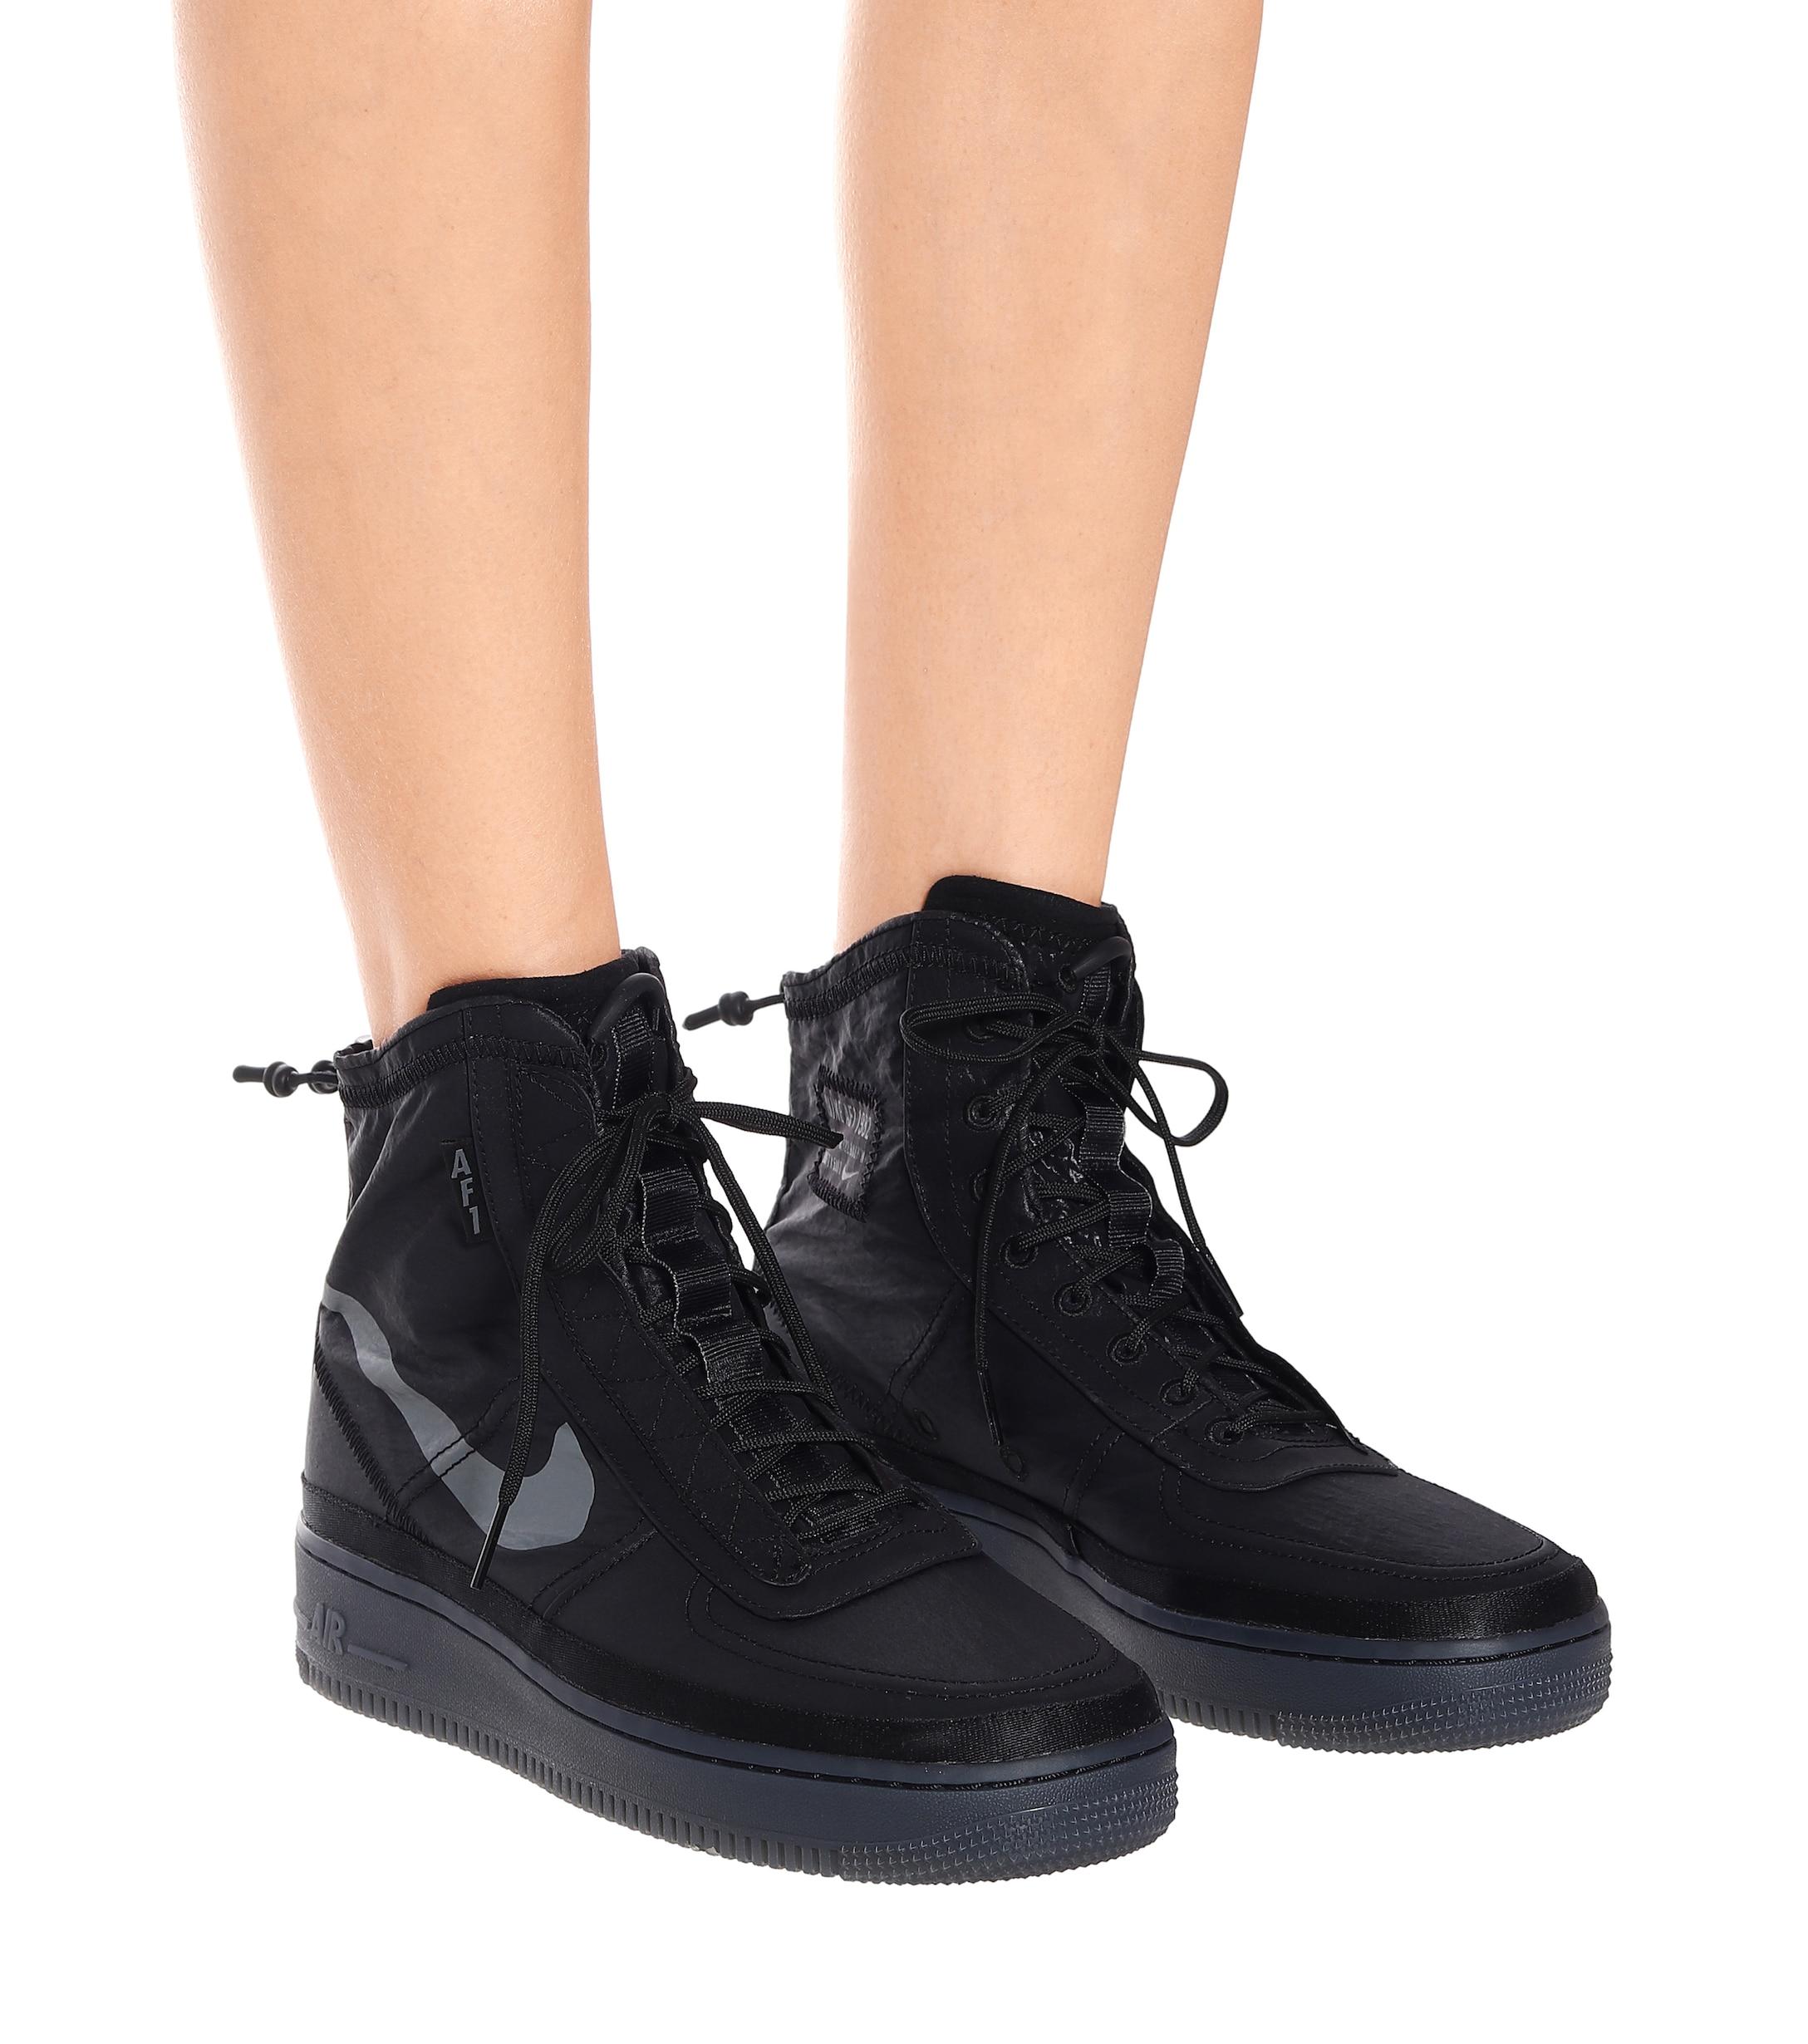 Nike Air Force 1 Shell Shoe in Black | Lyst